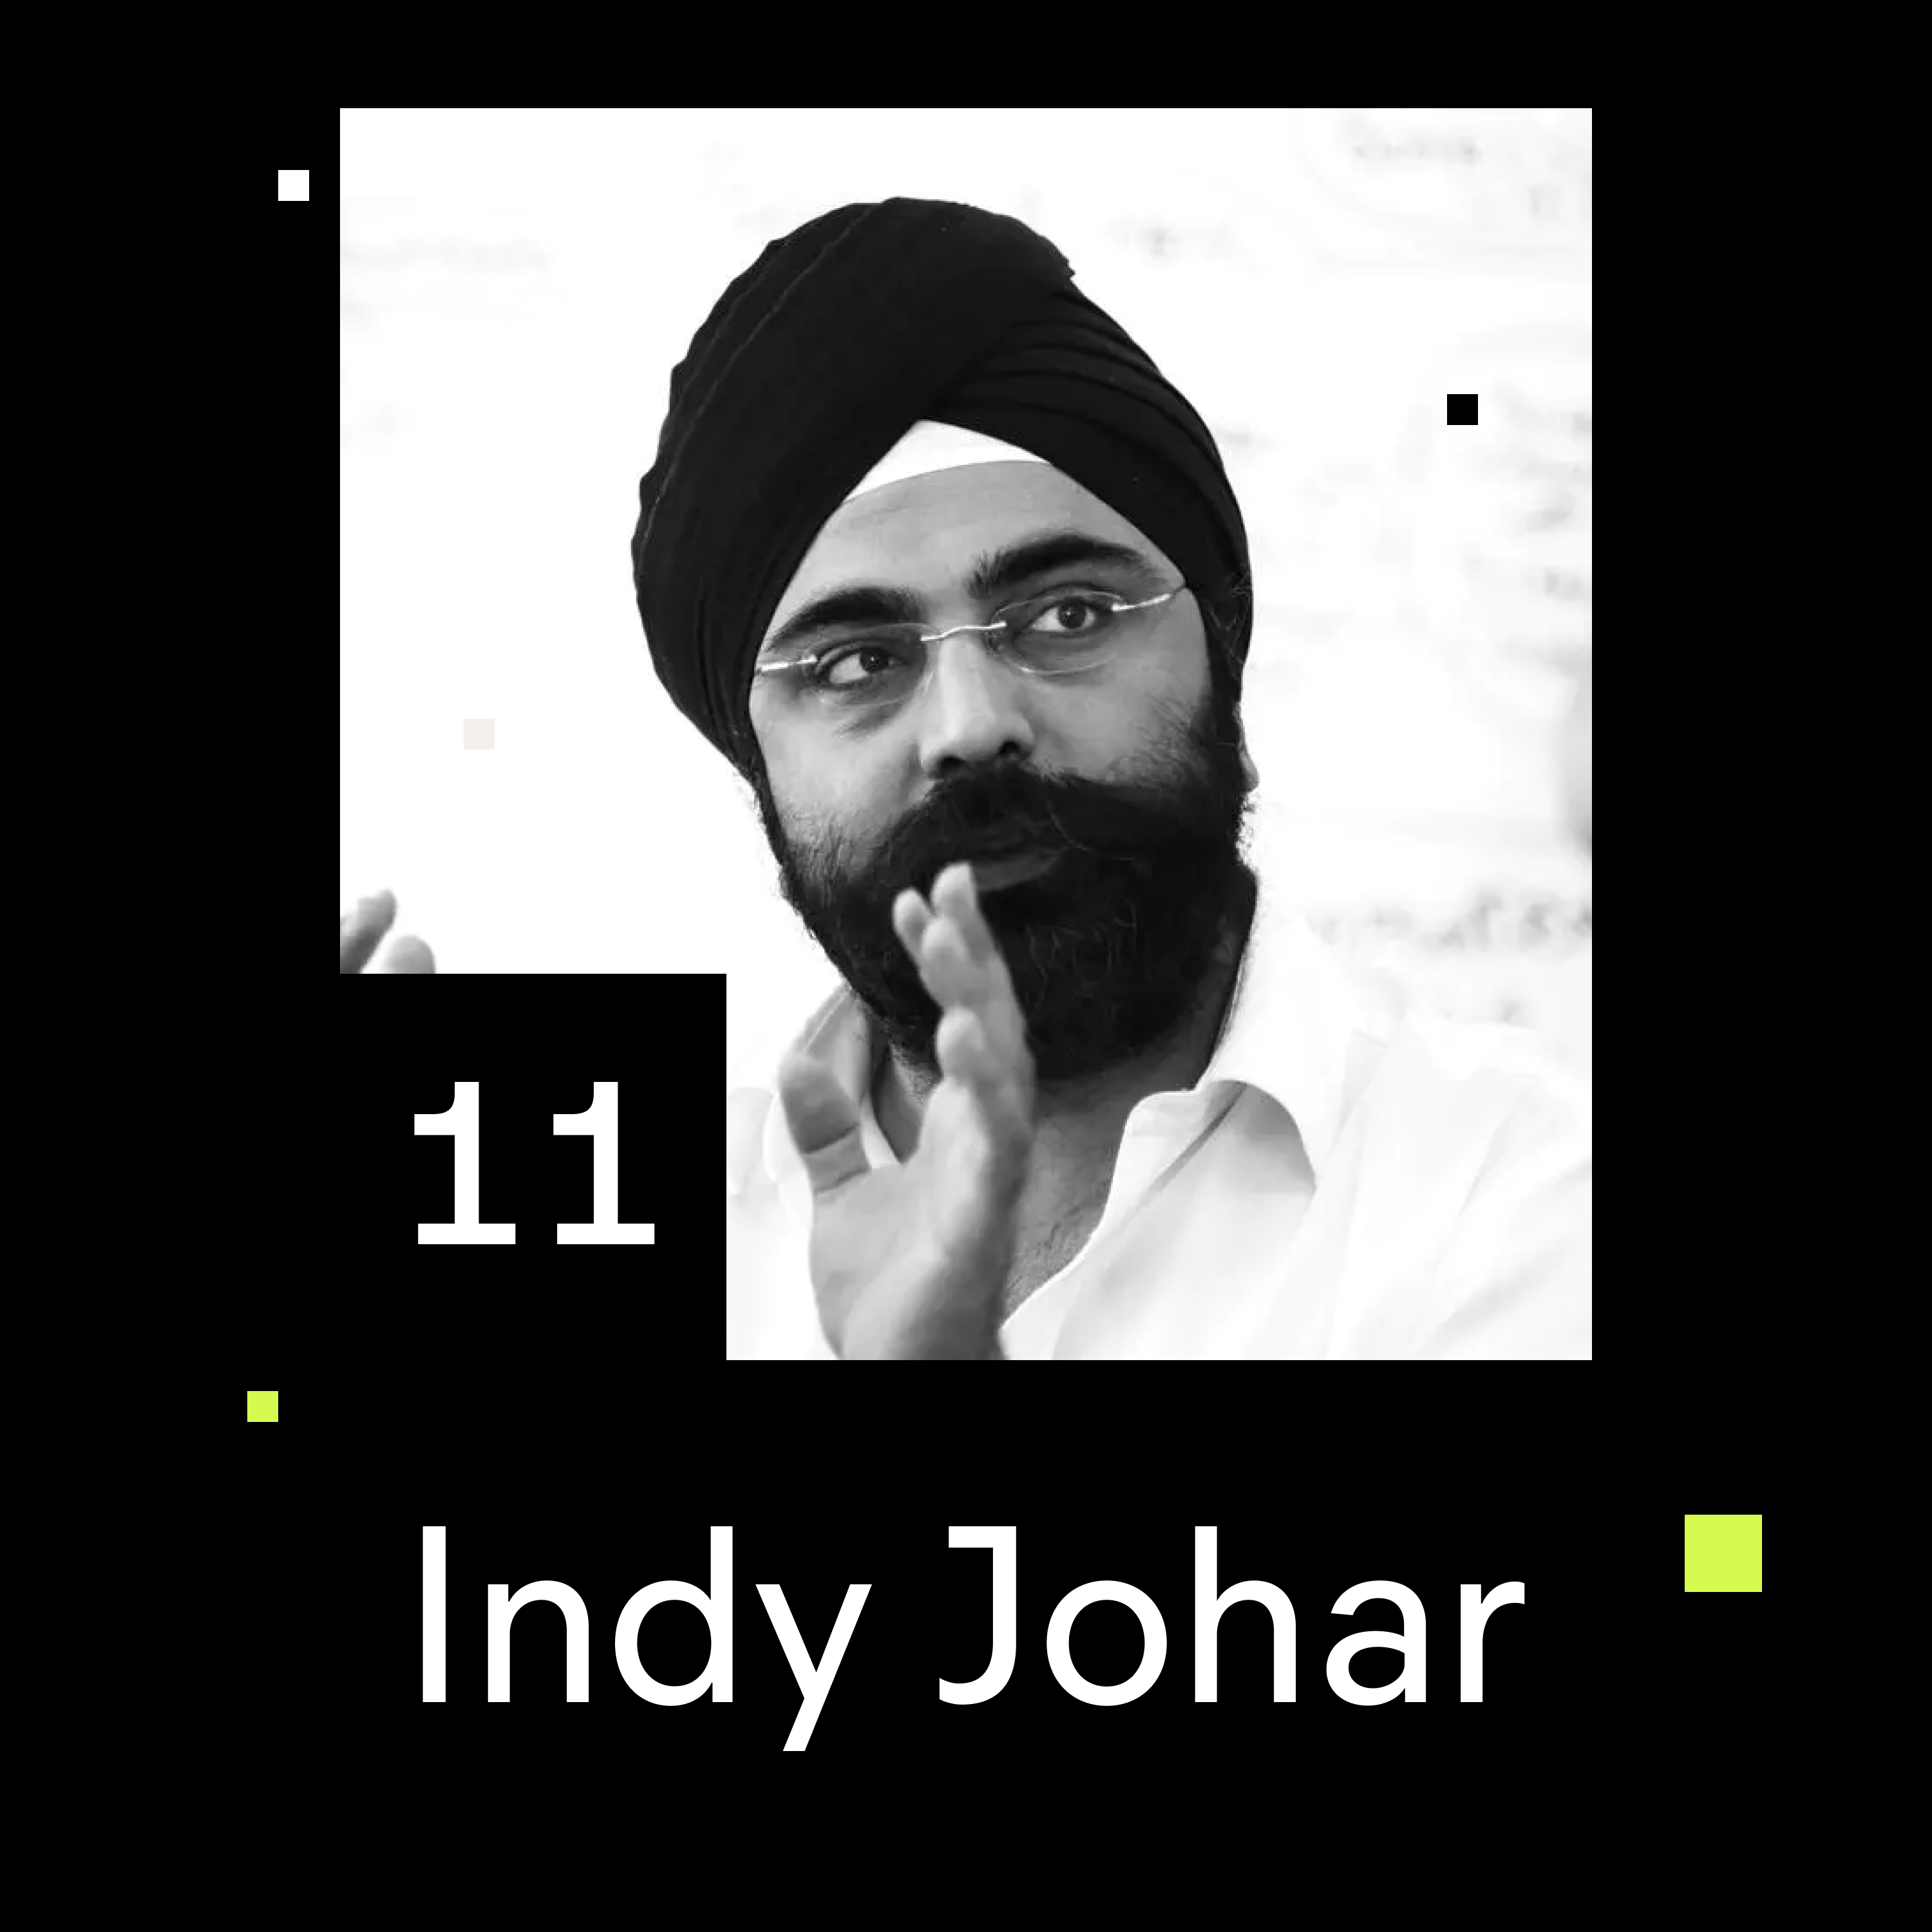 Cover of the 11th episode of the shaping chaos podcast feature Indy Johar, the founder of Dark Matter Labs.